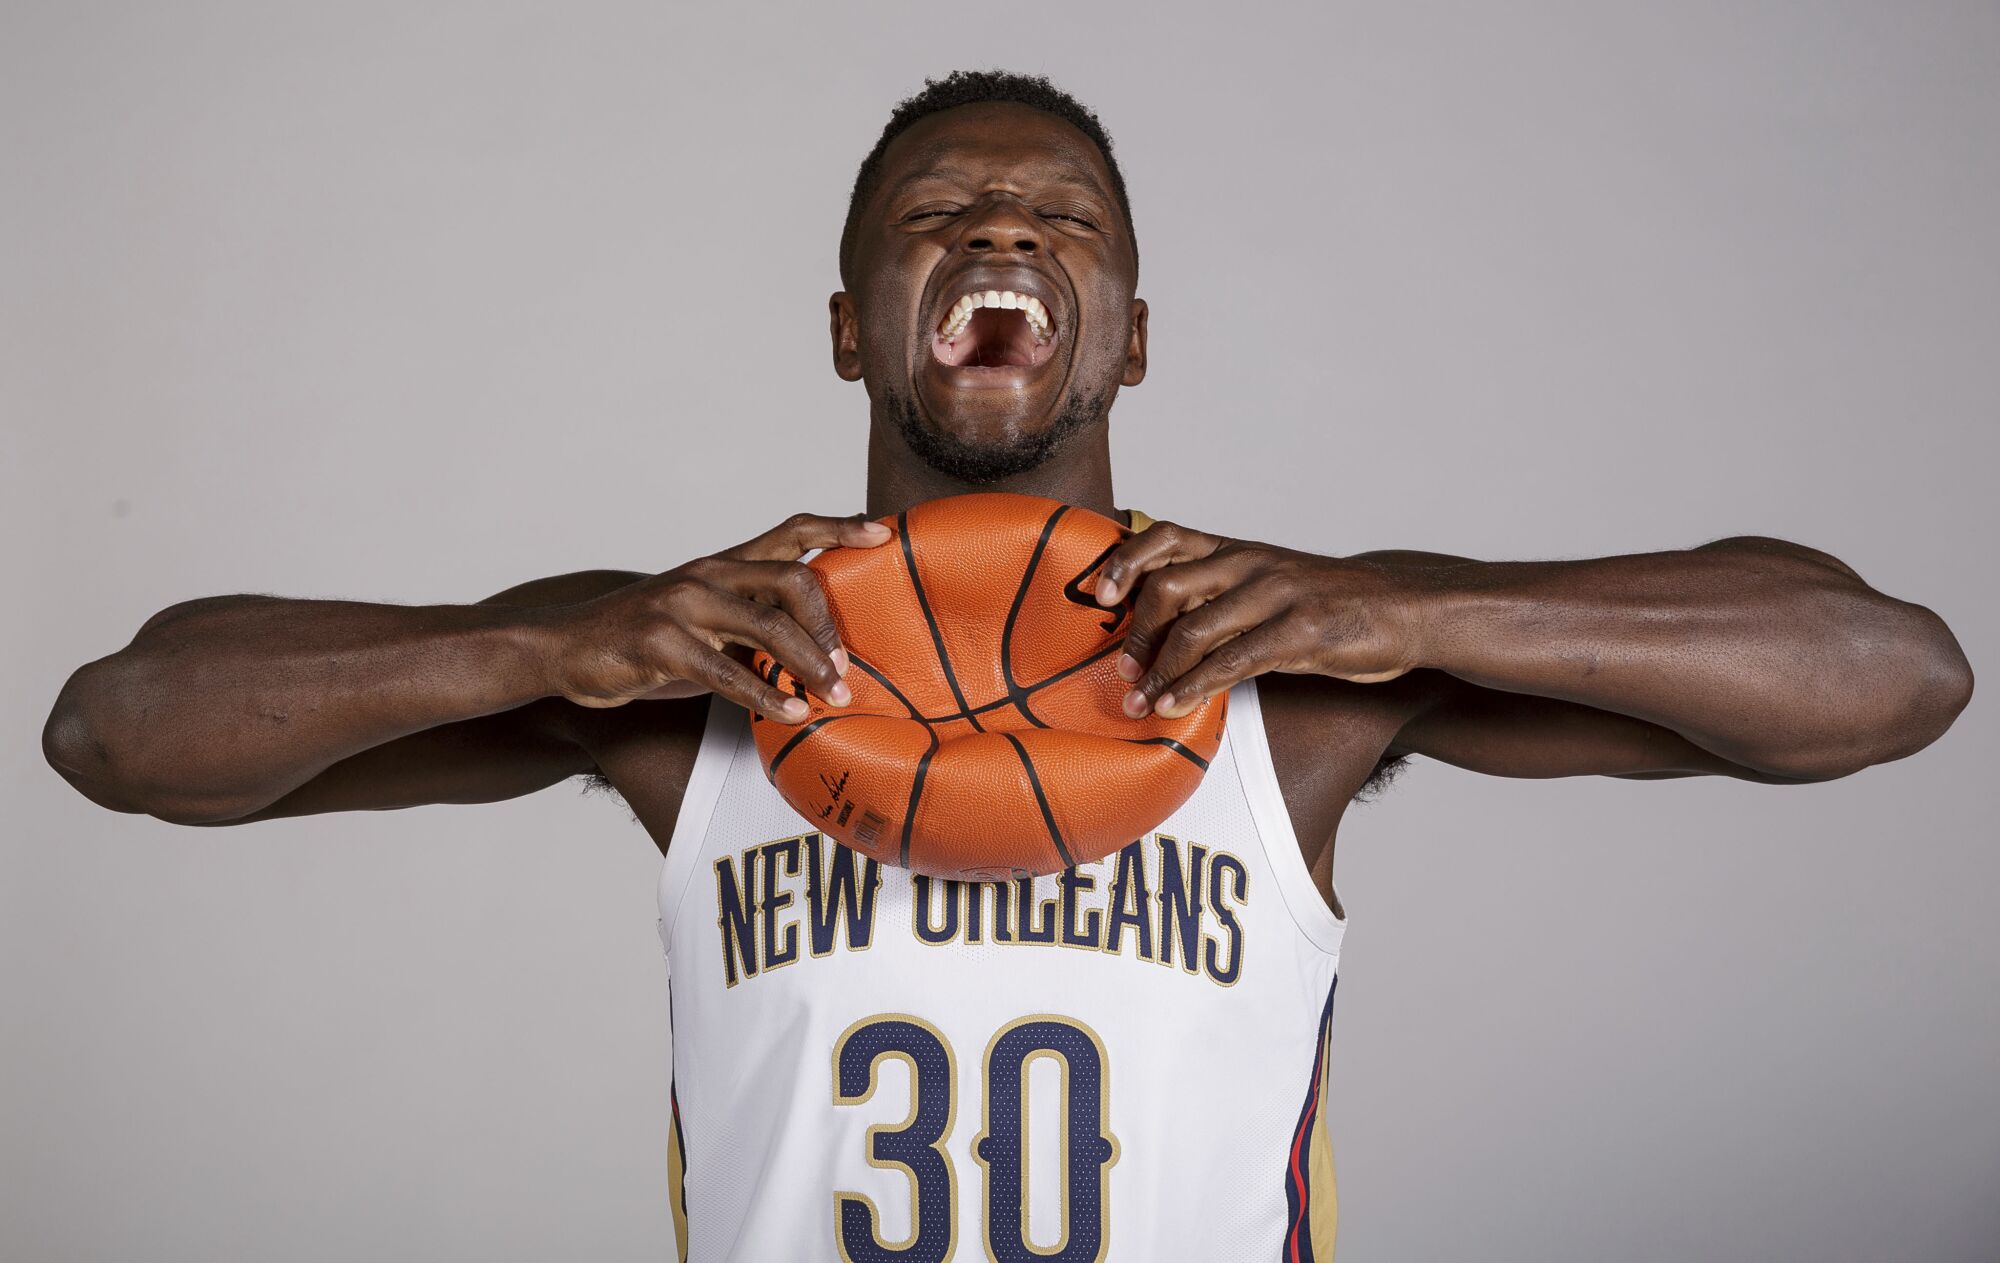 Pelicans forward Julius Randle poses for a photograph during media day in 2018.